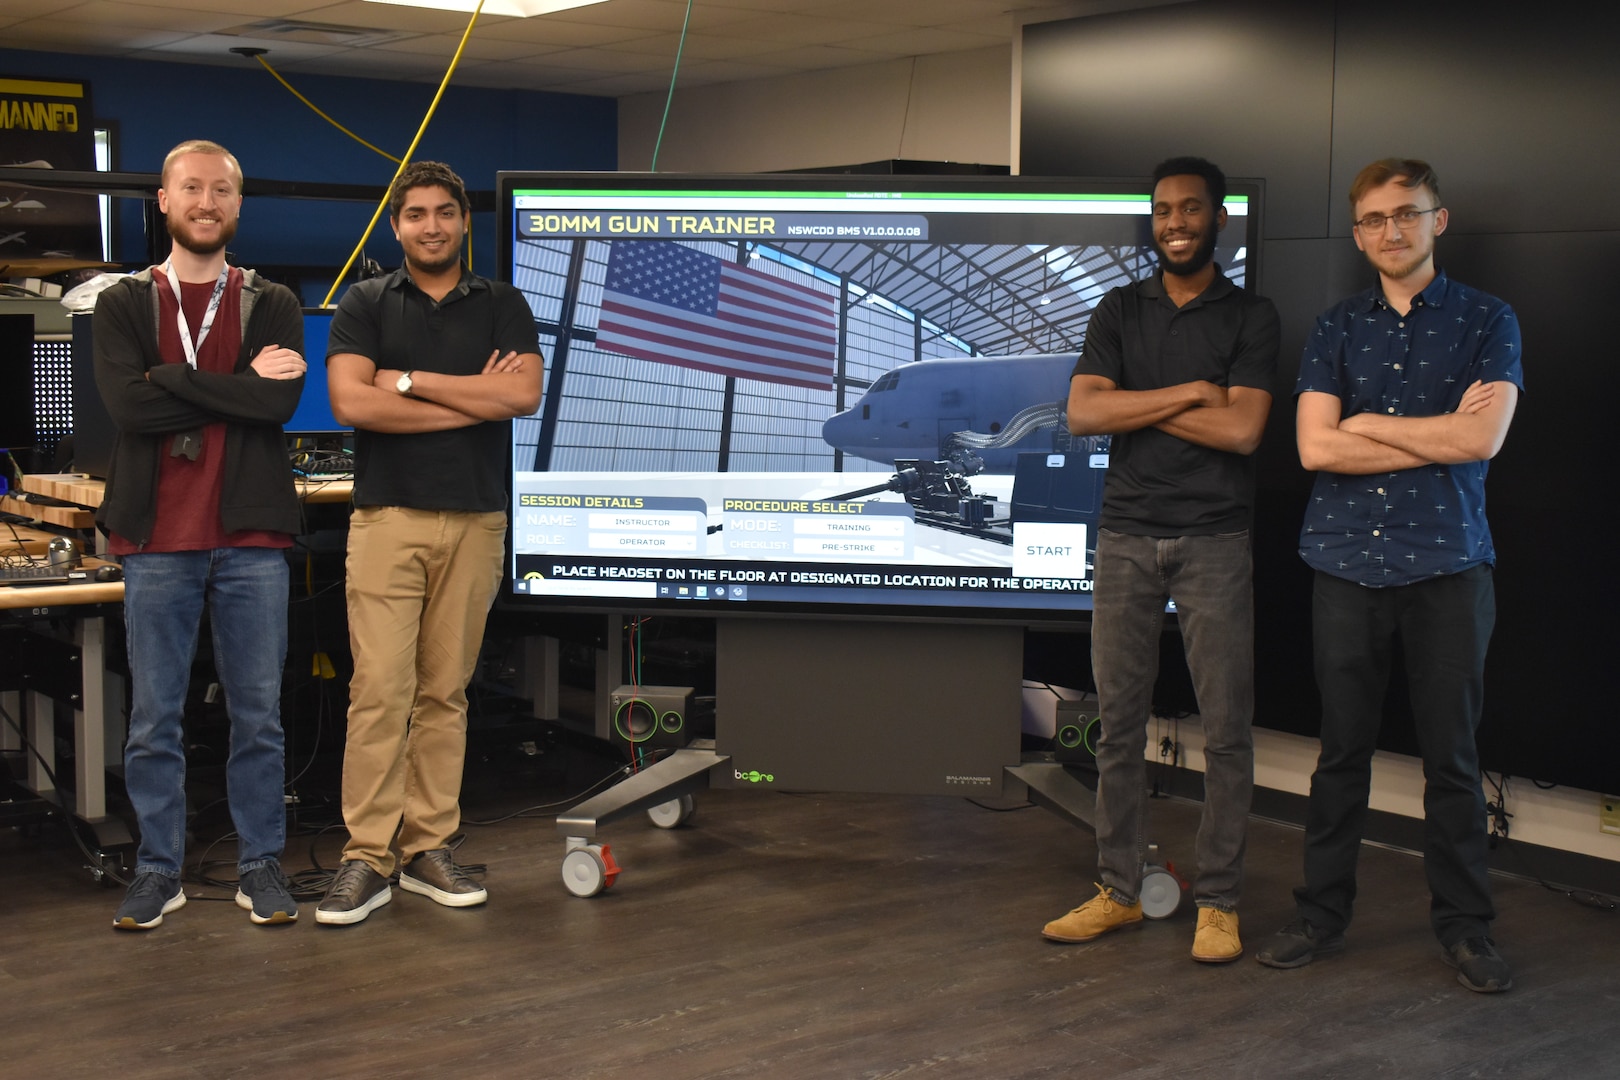 IMAGE: Brendan Dolata, Amit Nemani, Brandon Gipson and Devon Oberdan are all computer scientists at NSWC Dahlgren Division, working on the virtual reality (VR)-based applications in the Battle Management System (BMS). The team works with Mike Weisman (not pictured), BMS Metrology and Augmented Reality/VR Project Lead, to implement the backend development on the application.